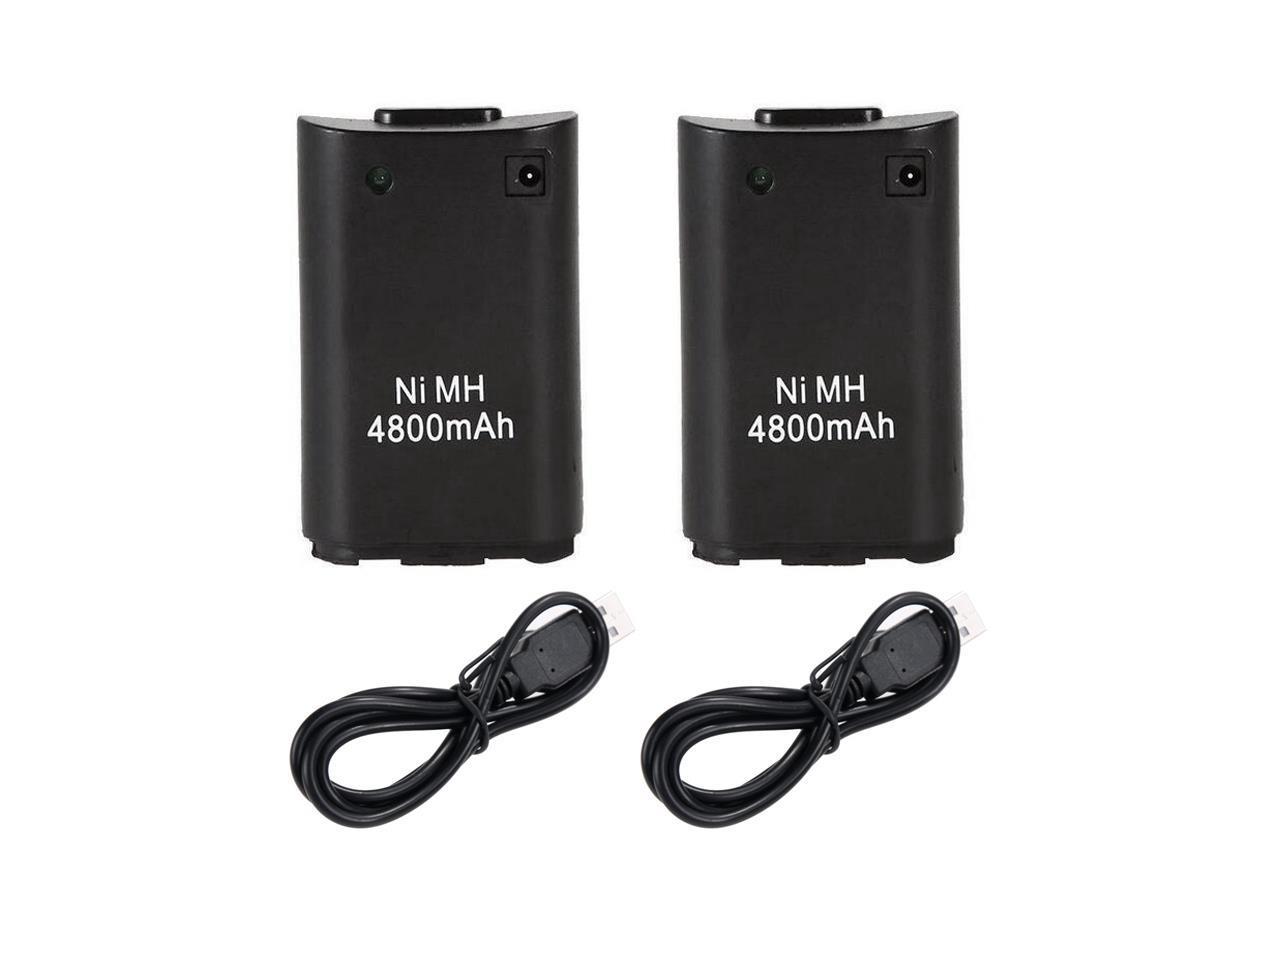 2pcs 4800mAh Battery Pack +Charger Cable for Xbox 360 Wireless Game Controller Gamepads Rechargeable Battery Pack for Xbox 360